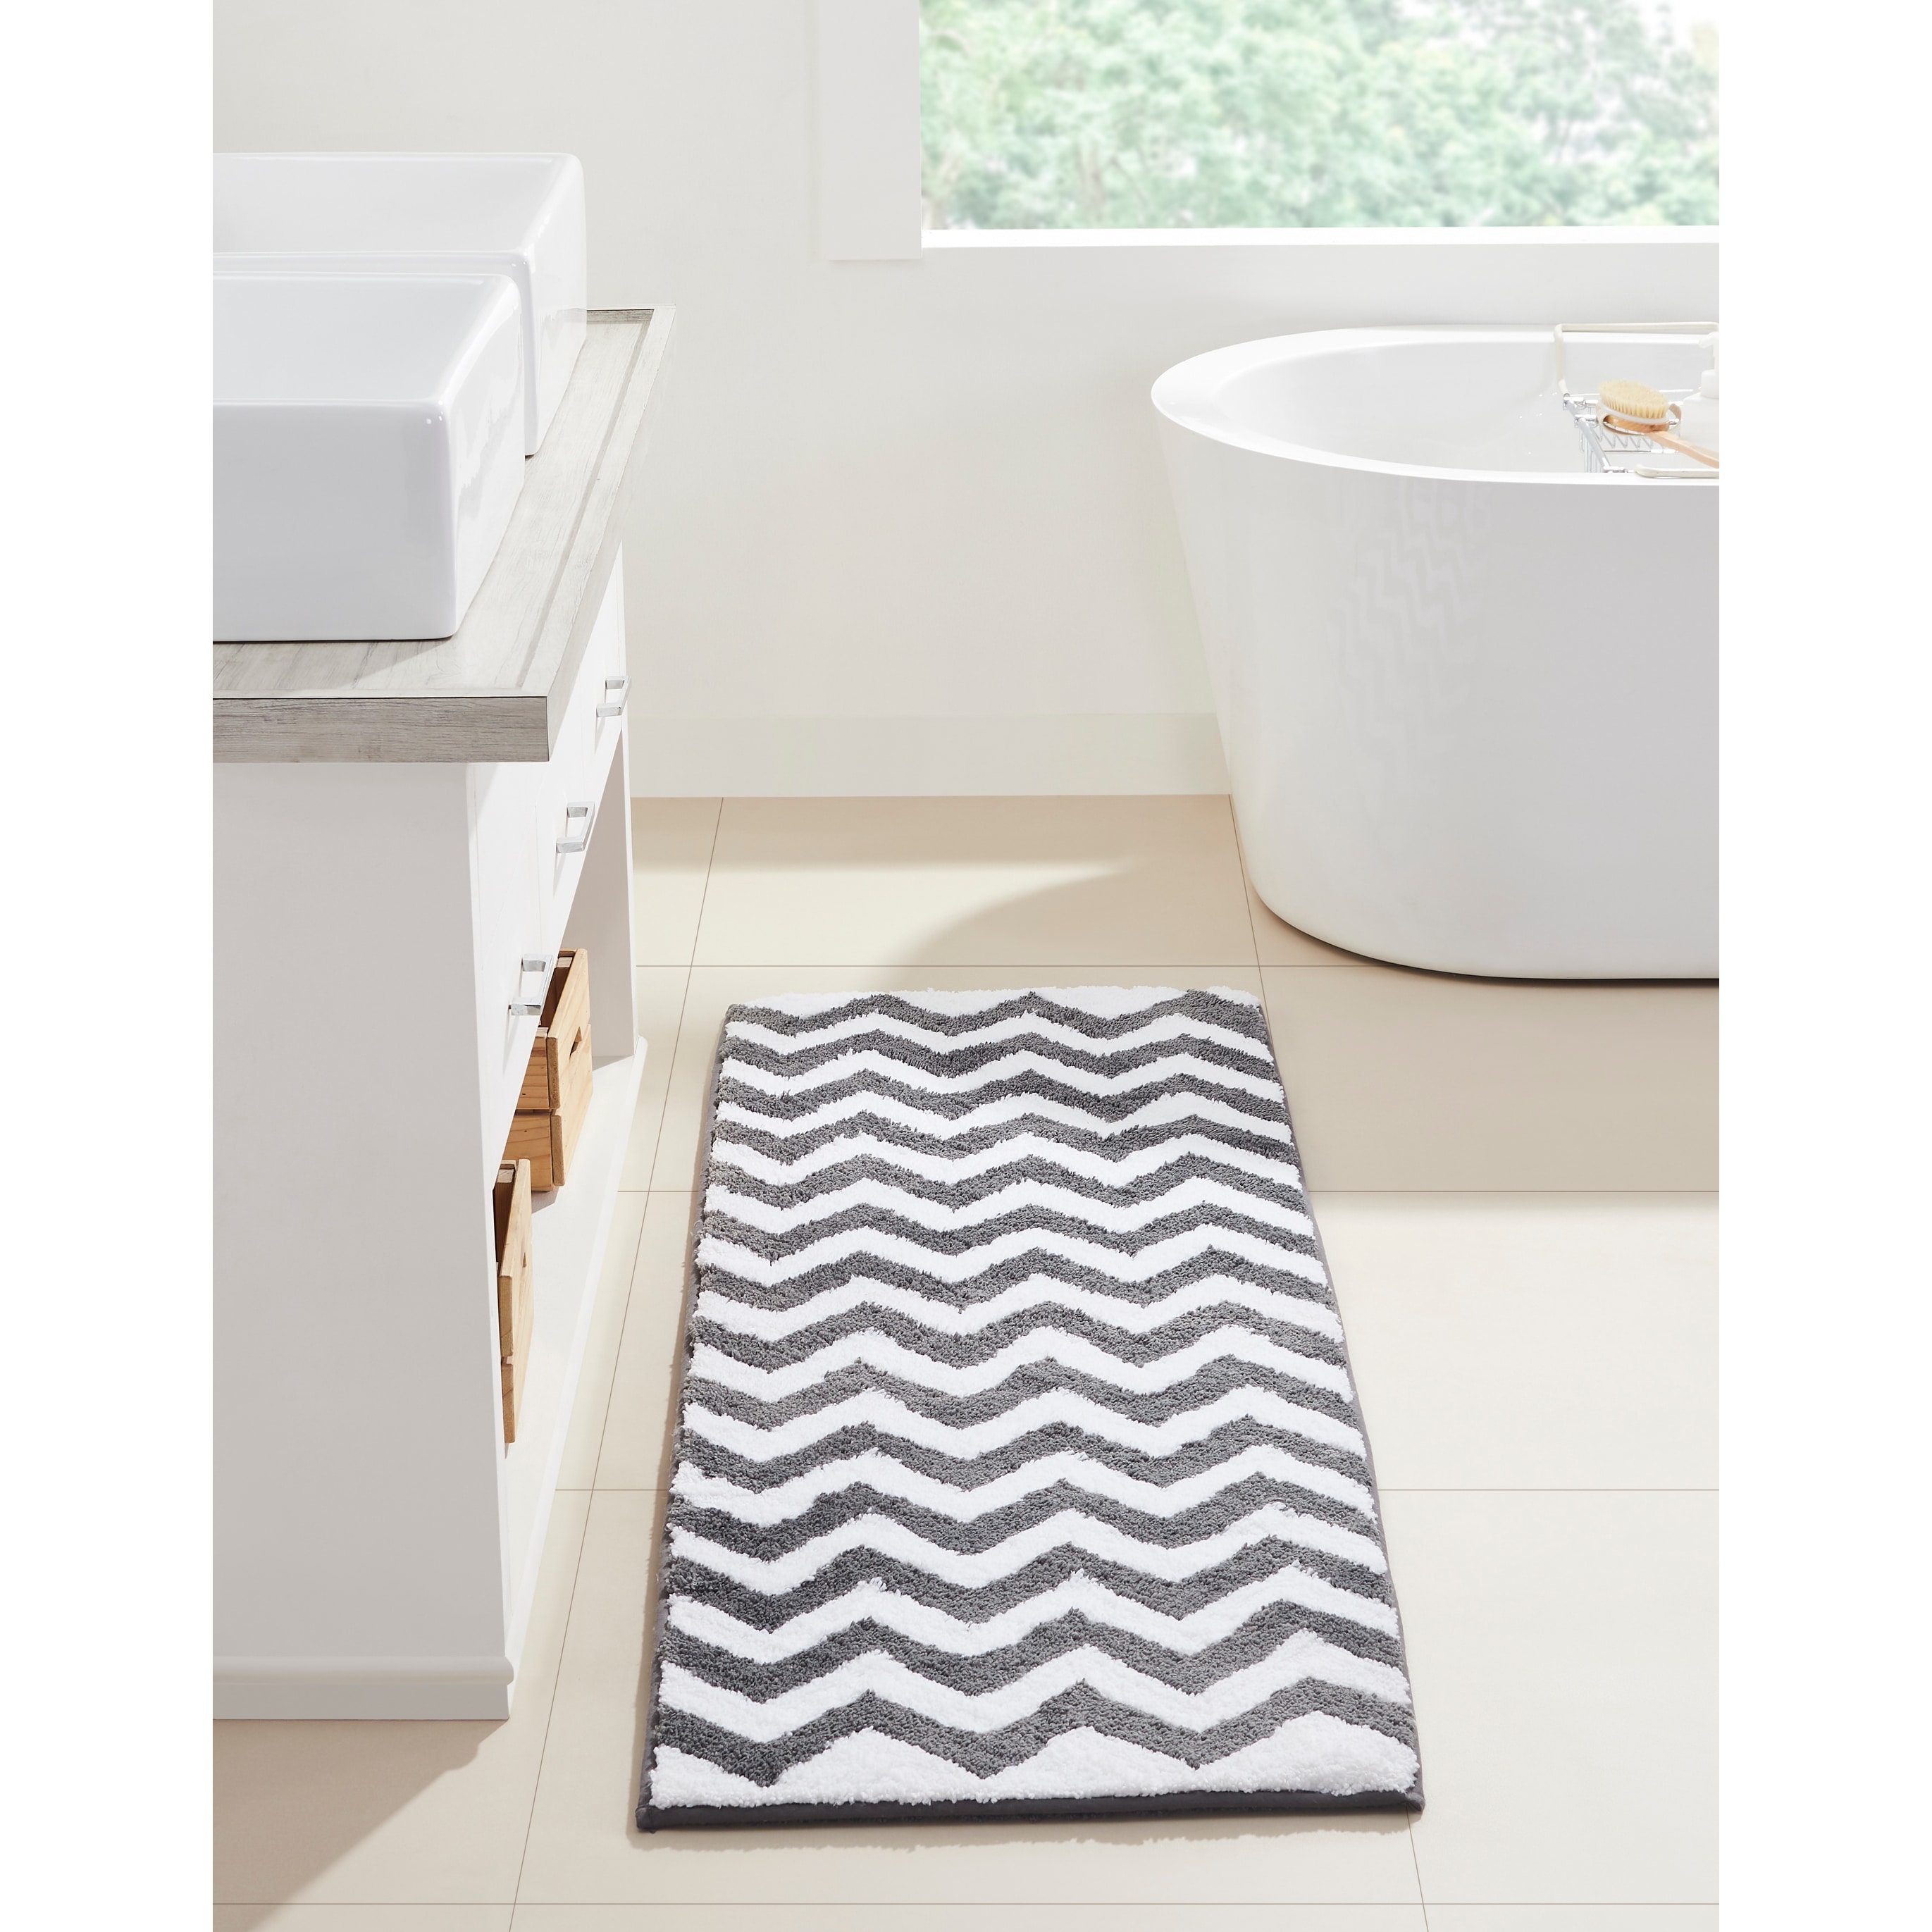 https://ak1.ostkcdn.com/images/products/is/images/direct/9584709e7fd2b9a16660f316249b80b06f861c25/Better-Trends-Pegasus-Tufted-Reversible-Bath-Mat-Rug-100%25-Polyester.jpg